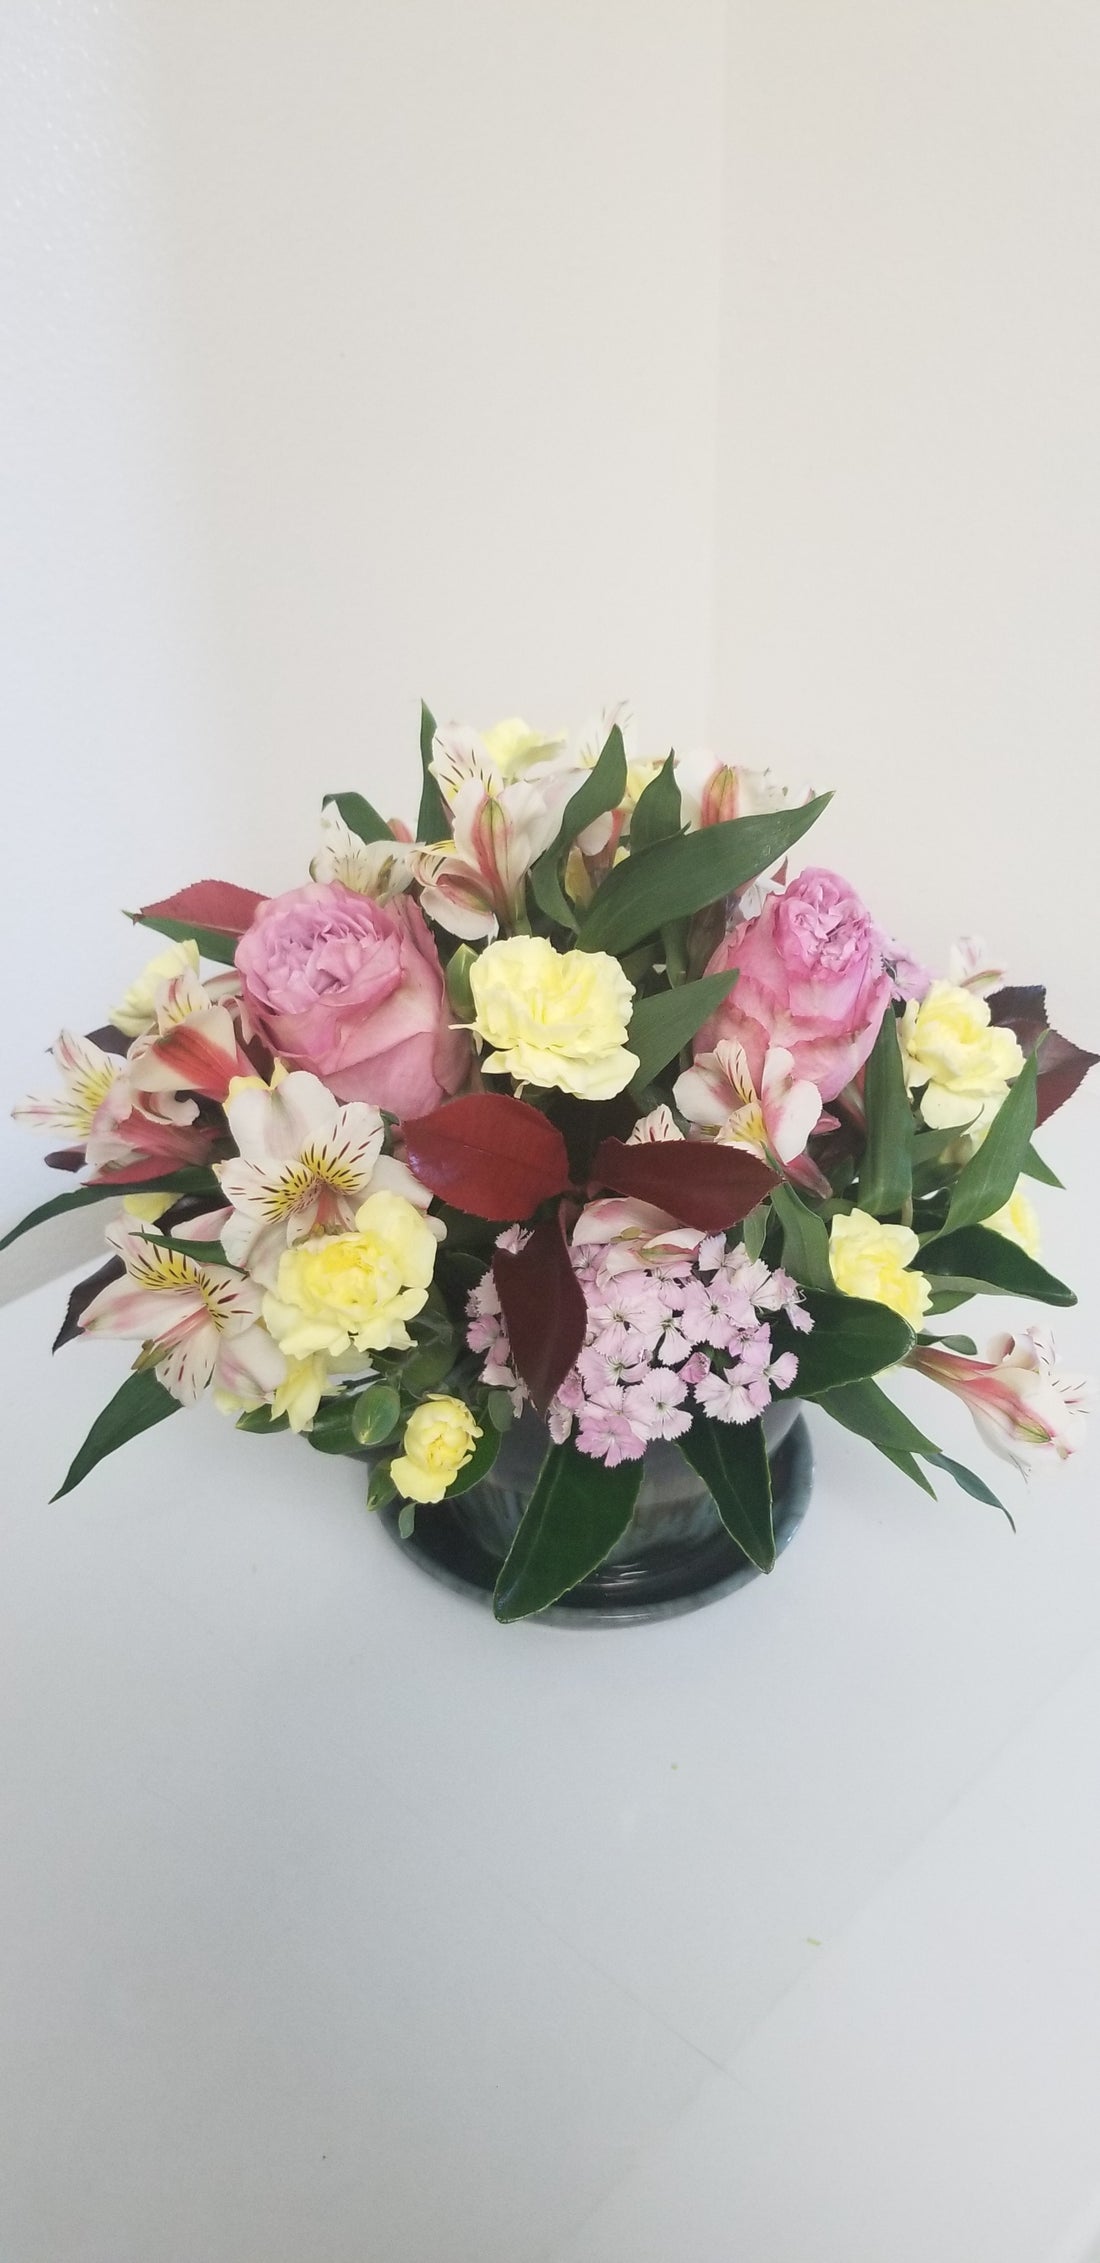 Fresh flower arrangement arranged in a tea cup. Queen's Crown garden roses present a lovely purple tone complementing yellow mini carnations, pink dianthus, pink alstromeria and lovely mixed foliage.